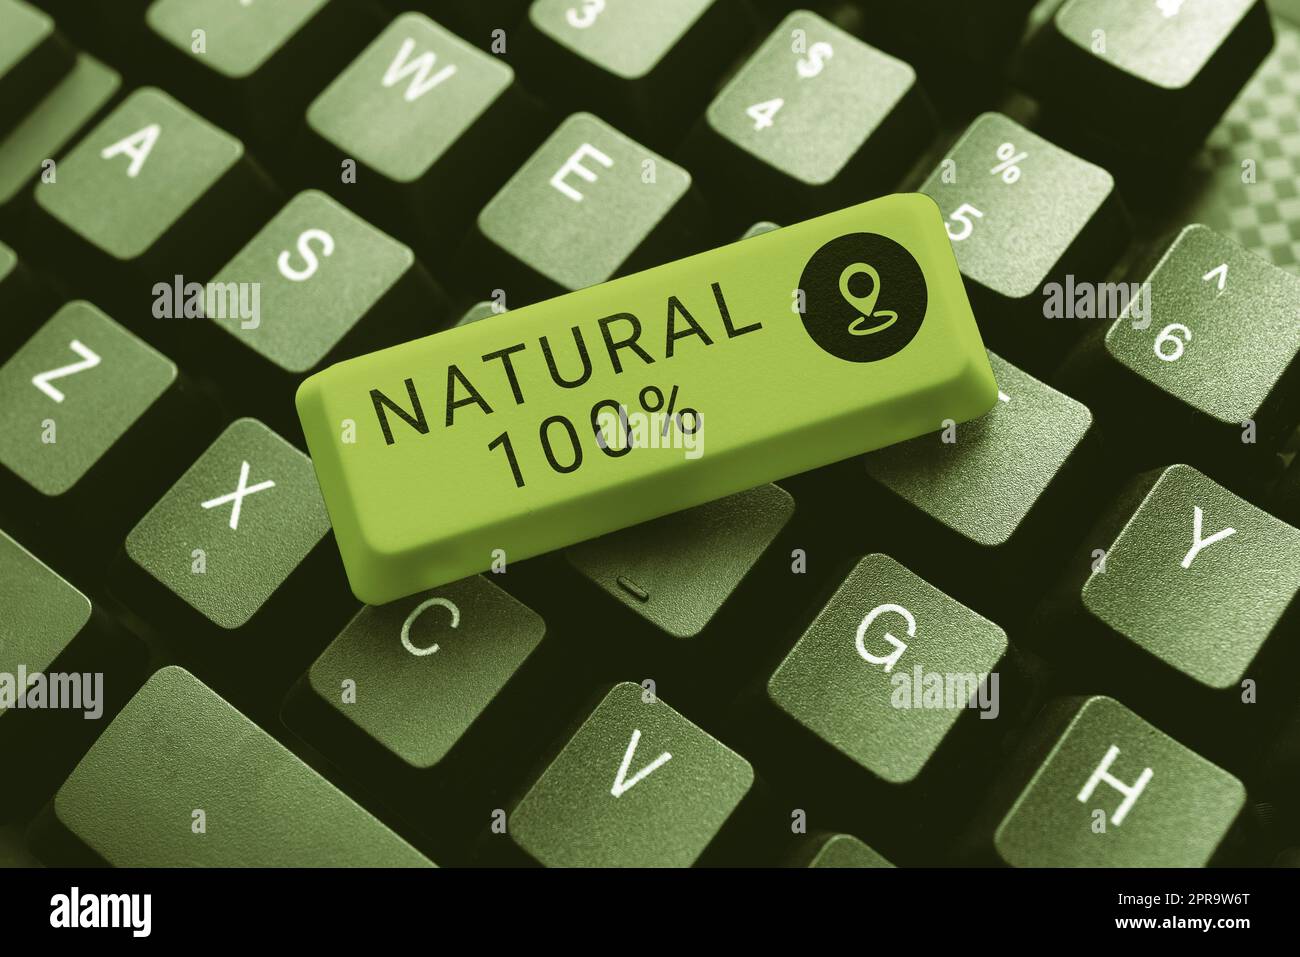 Writing displaying text Natural 100. Business approach Minimally processed and does not contain artificial flavors -49202 Stock Photo